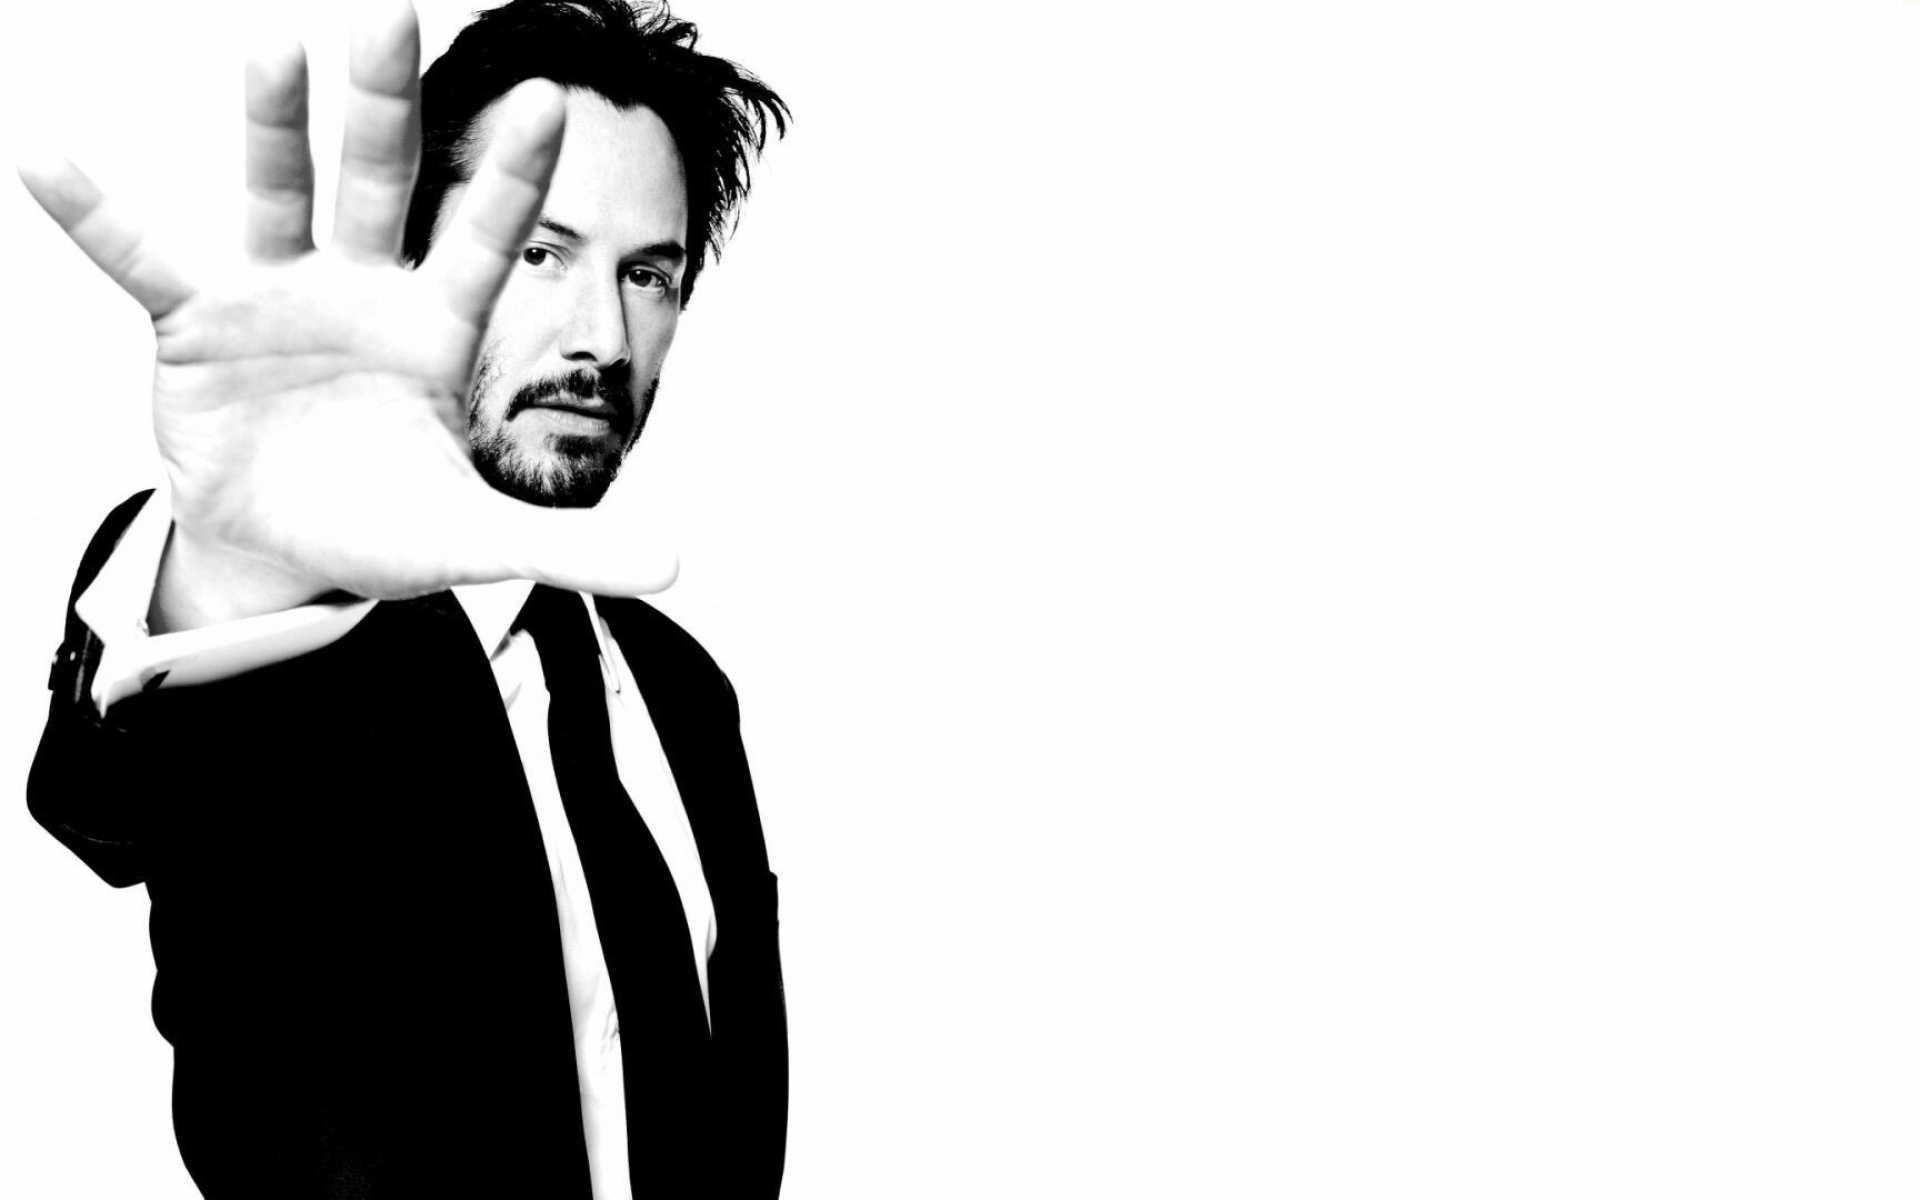 Keanu Reeves: Stared in the romantic drama The Lake House, 2006. 1920x1200 HD Wallpaper.